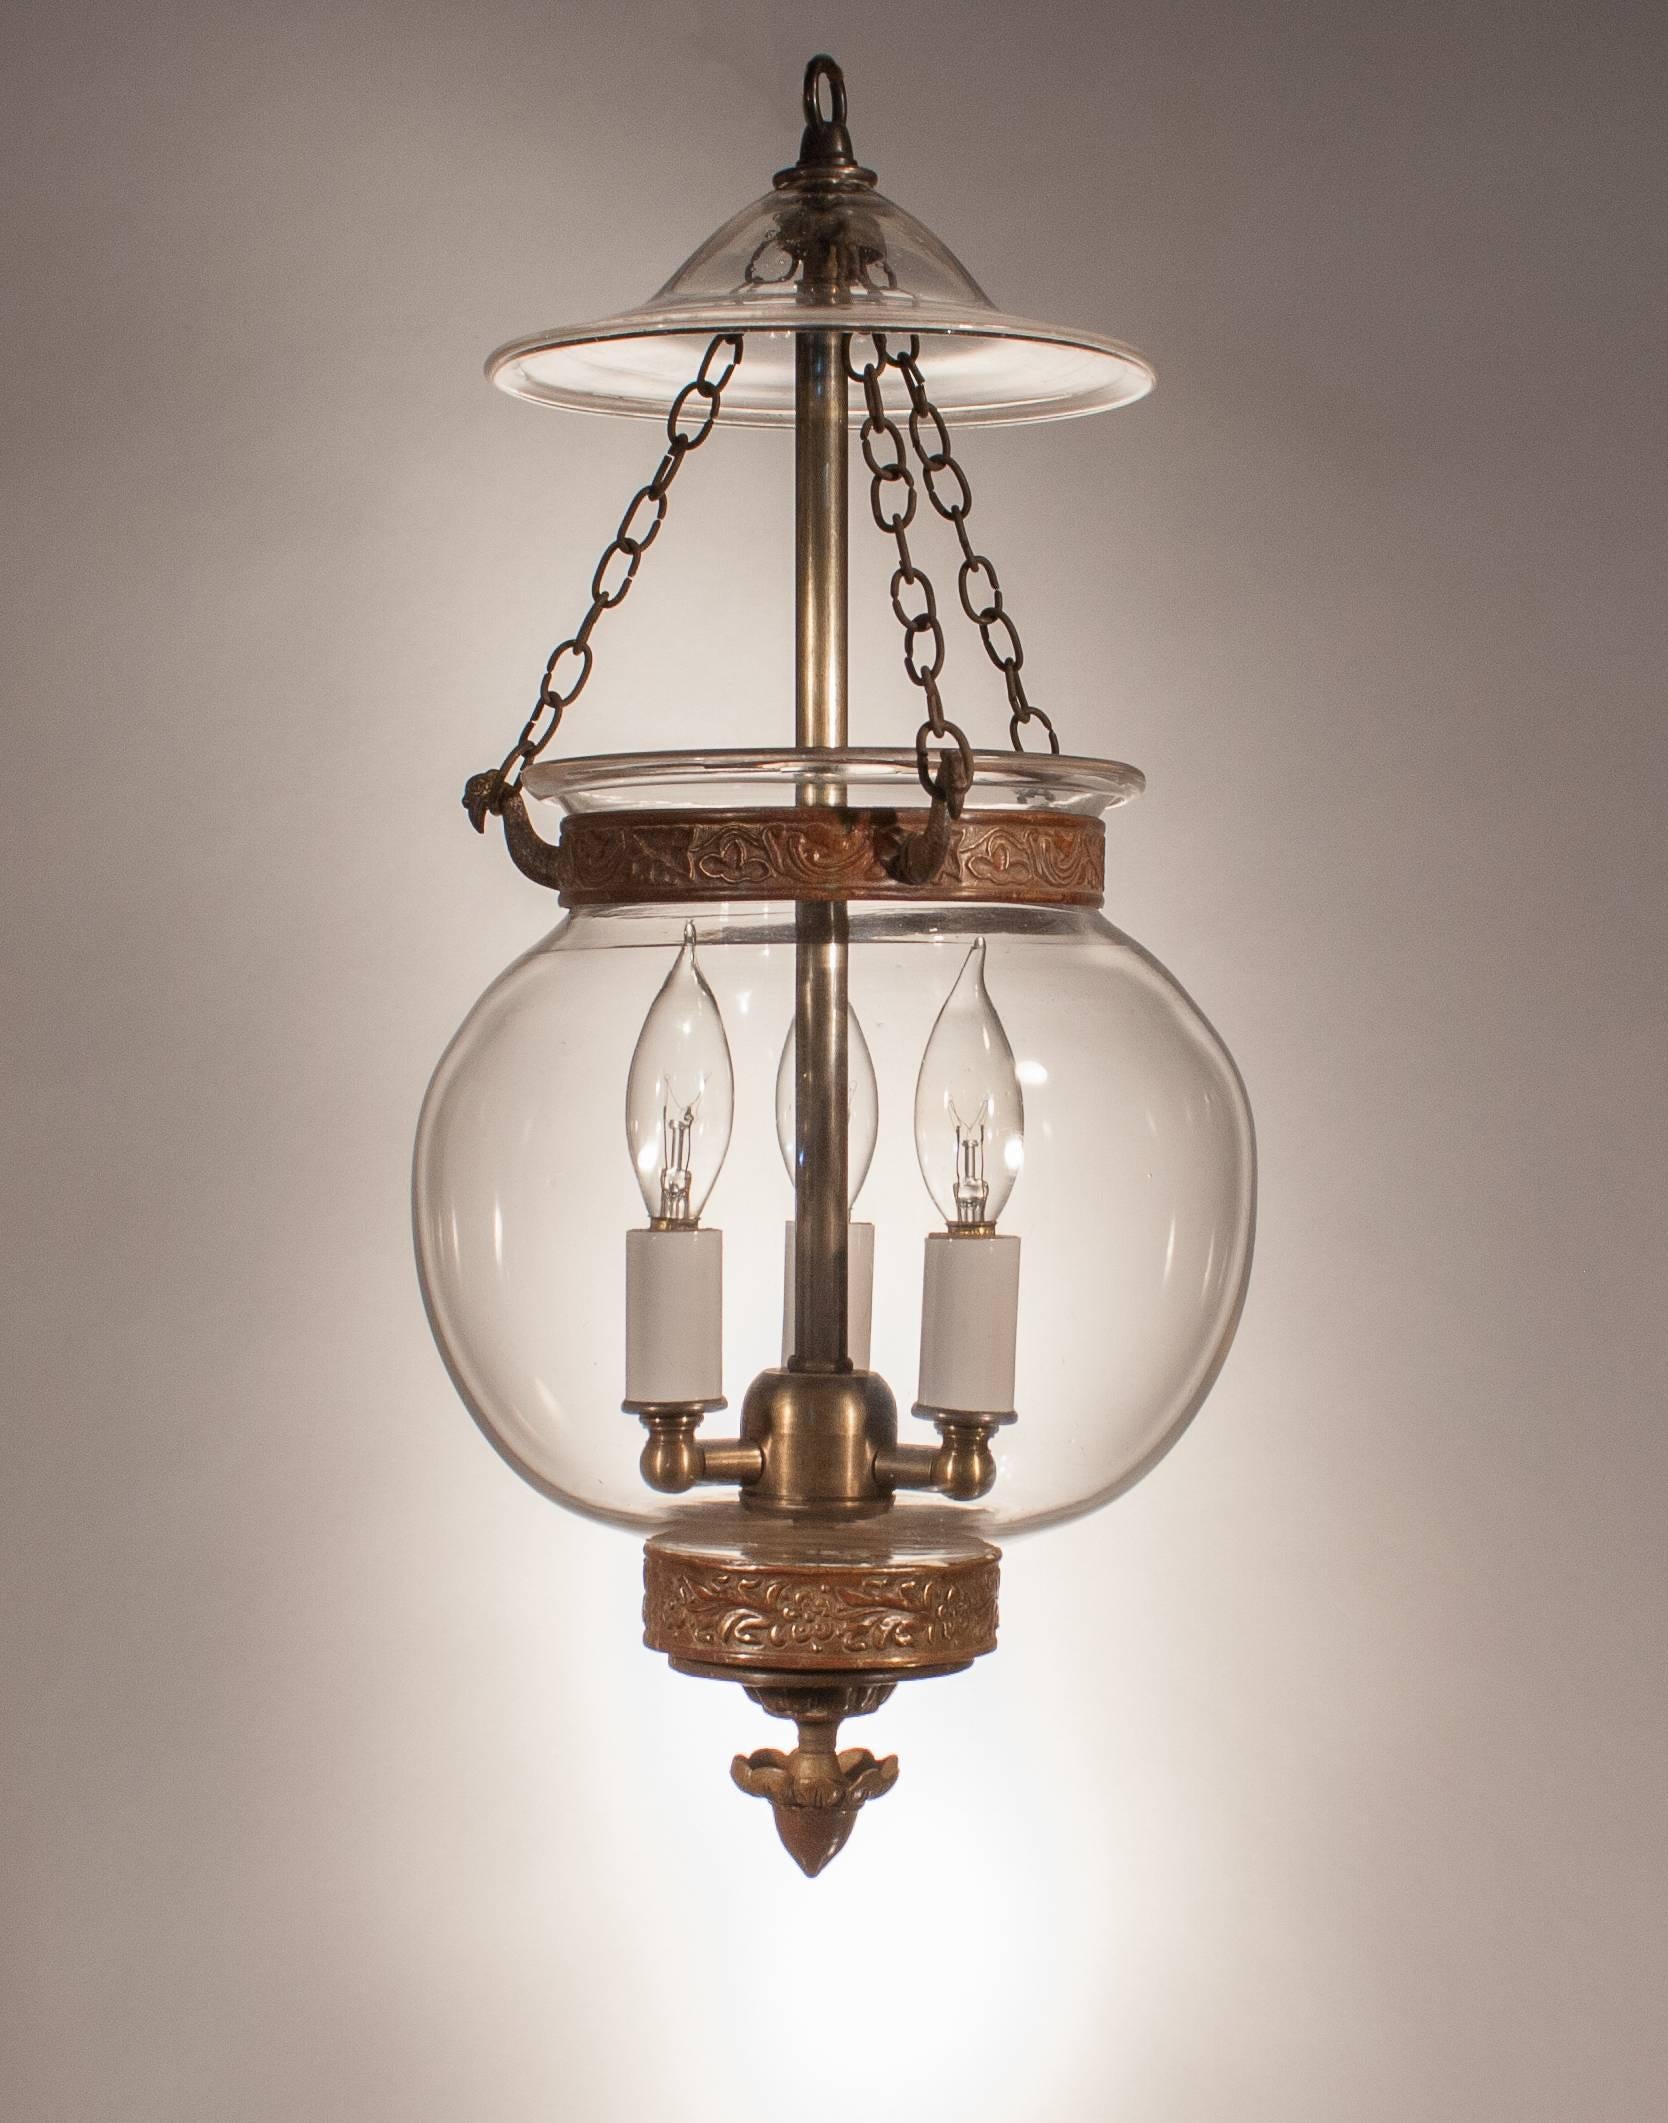 A Stand-out lantern in our bell jar lighting collection, this circa 1890 globe pendant features excellent quality handblown glass and a lovely silhouette. In addition, the ornate finial and brass band (not original to the lantern) are the perfect